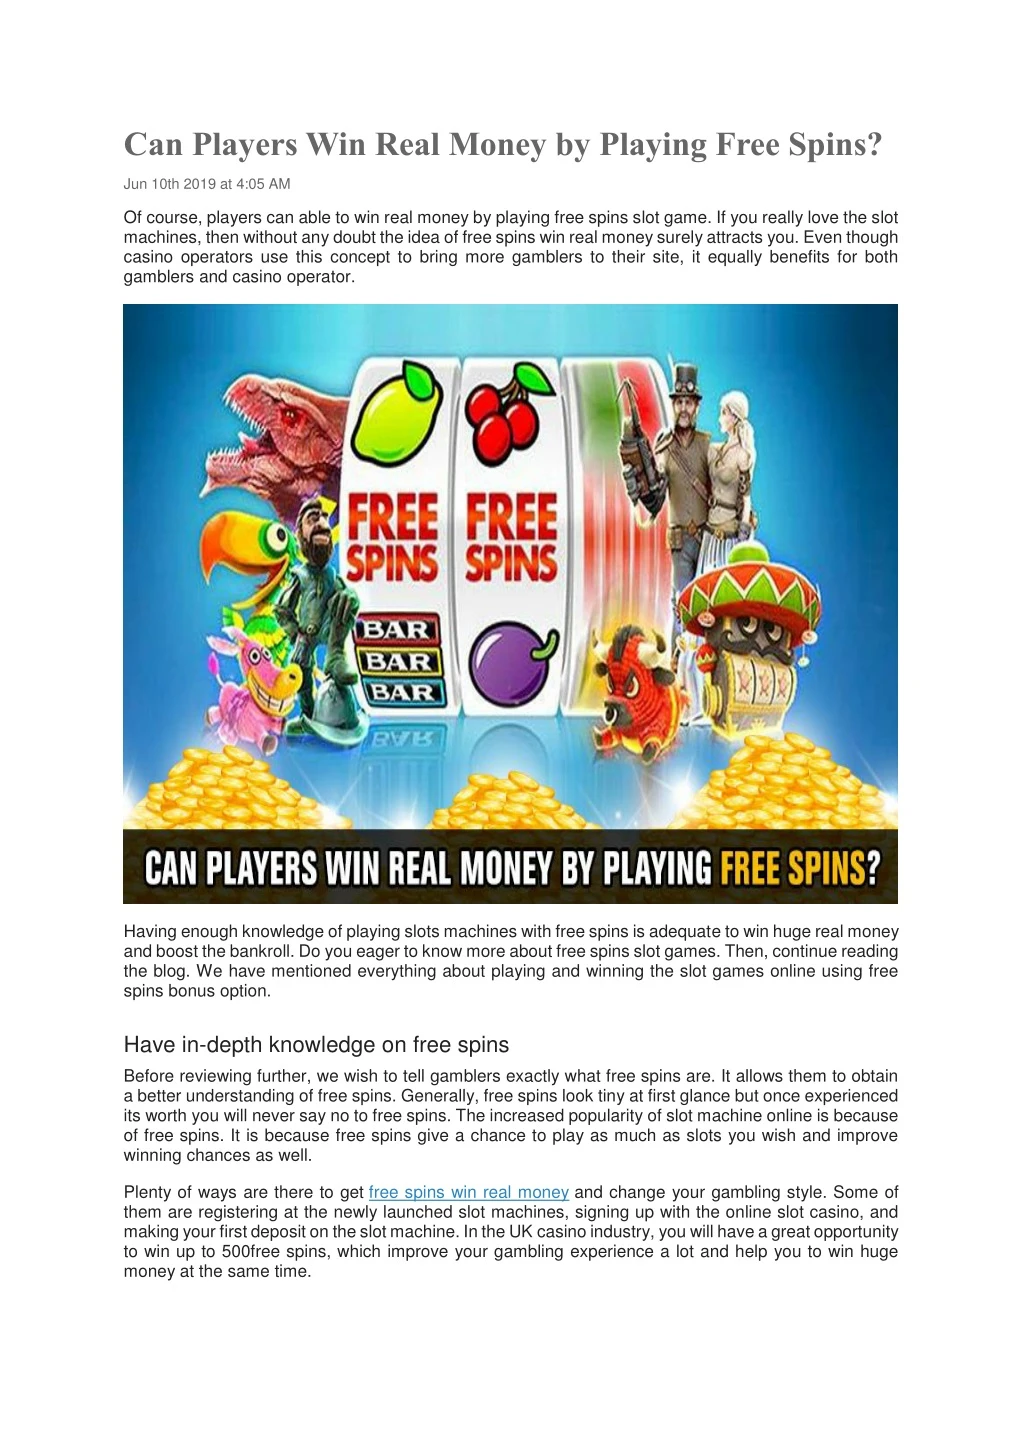 can players win real money by playing free spins